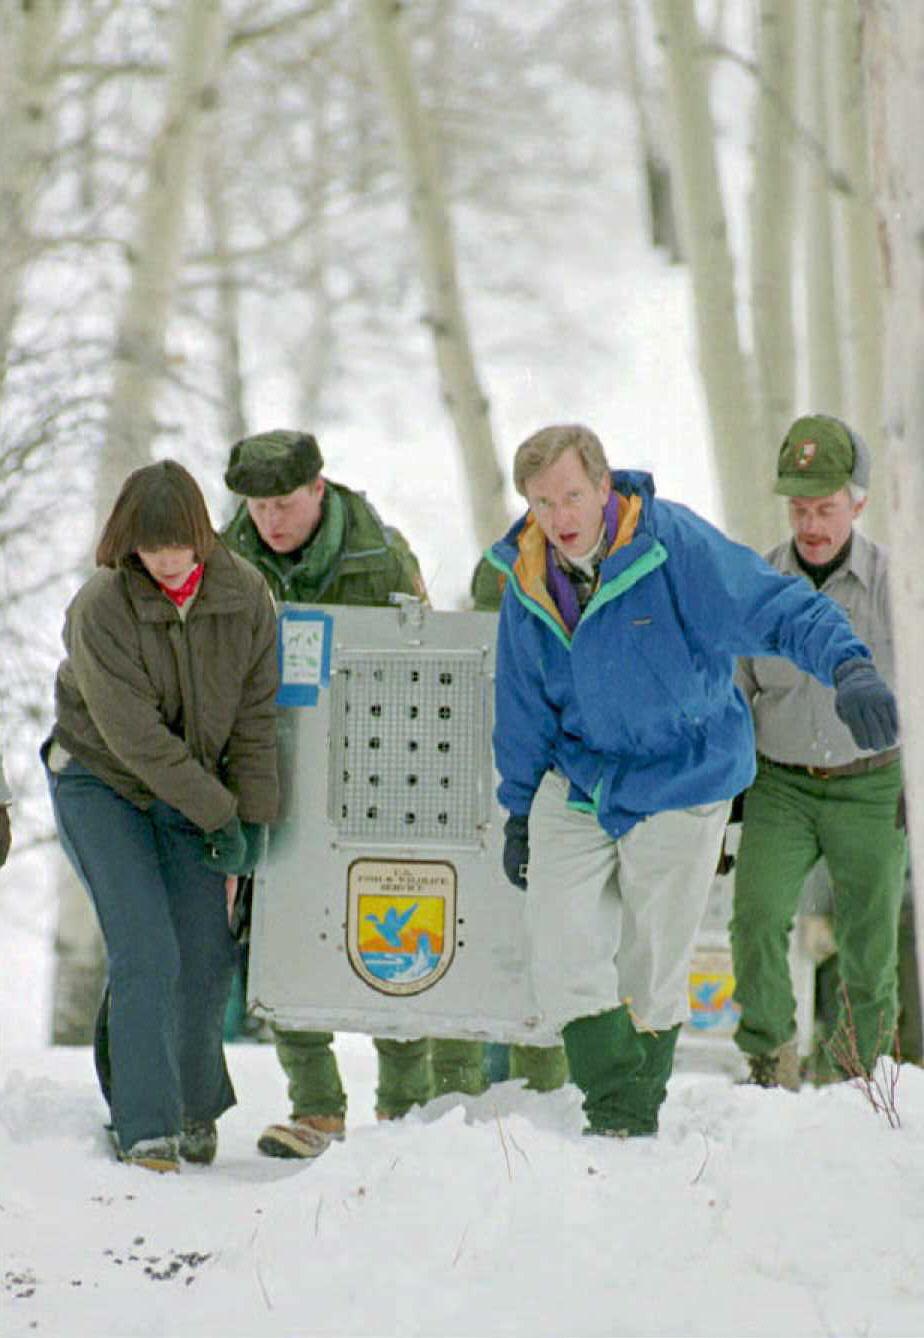 U.S. Fish and Wildlife Service Director Mollie Beattie (L), US Interior Secretary Bruce Babbitt (2nd R), Yellowstone Superintendent Mike Finley (2nd L), and Yellowstone foreman Jim Evanoff (R) carry the first relocated wolf up to its pen in Yellowstone National Park, Wyoming (©Getty Images | <a href="https://www.gettyimages.com.au/detail/news-photo/fish-and-wildlife-service-director-mollie-beattie-us-news-photo/51969527">POOL/AFP</a>)